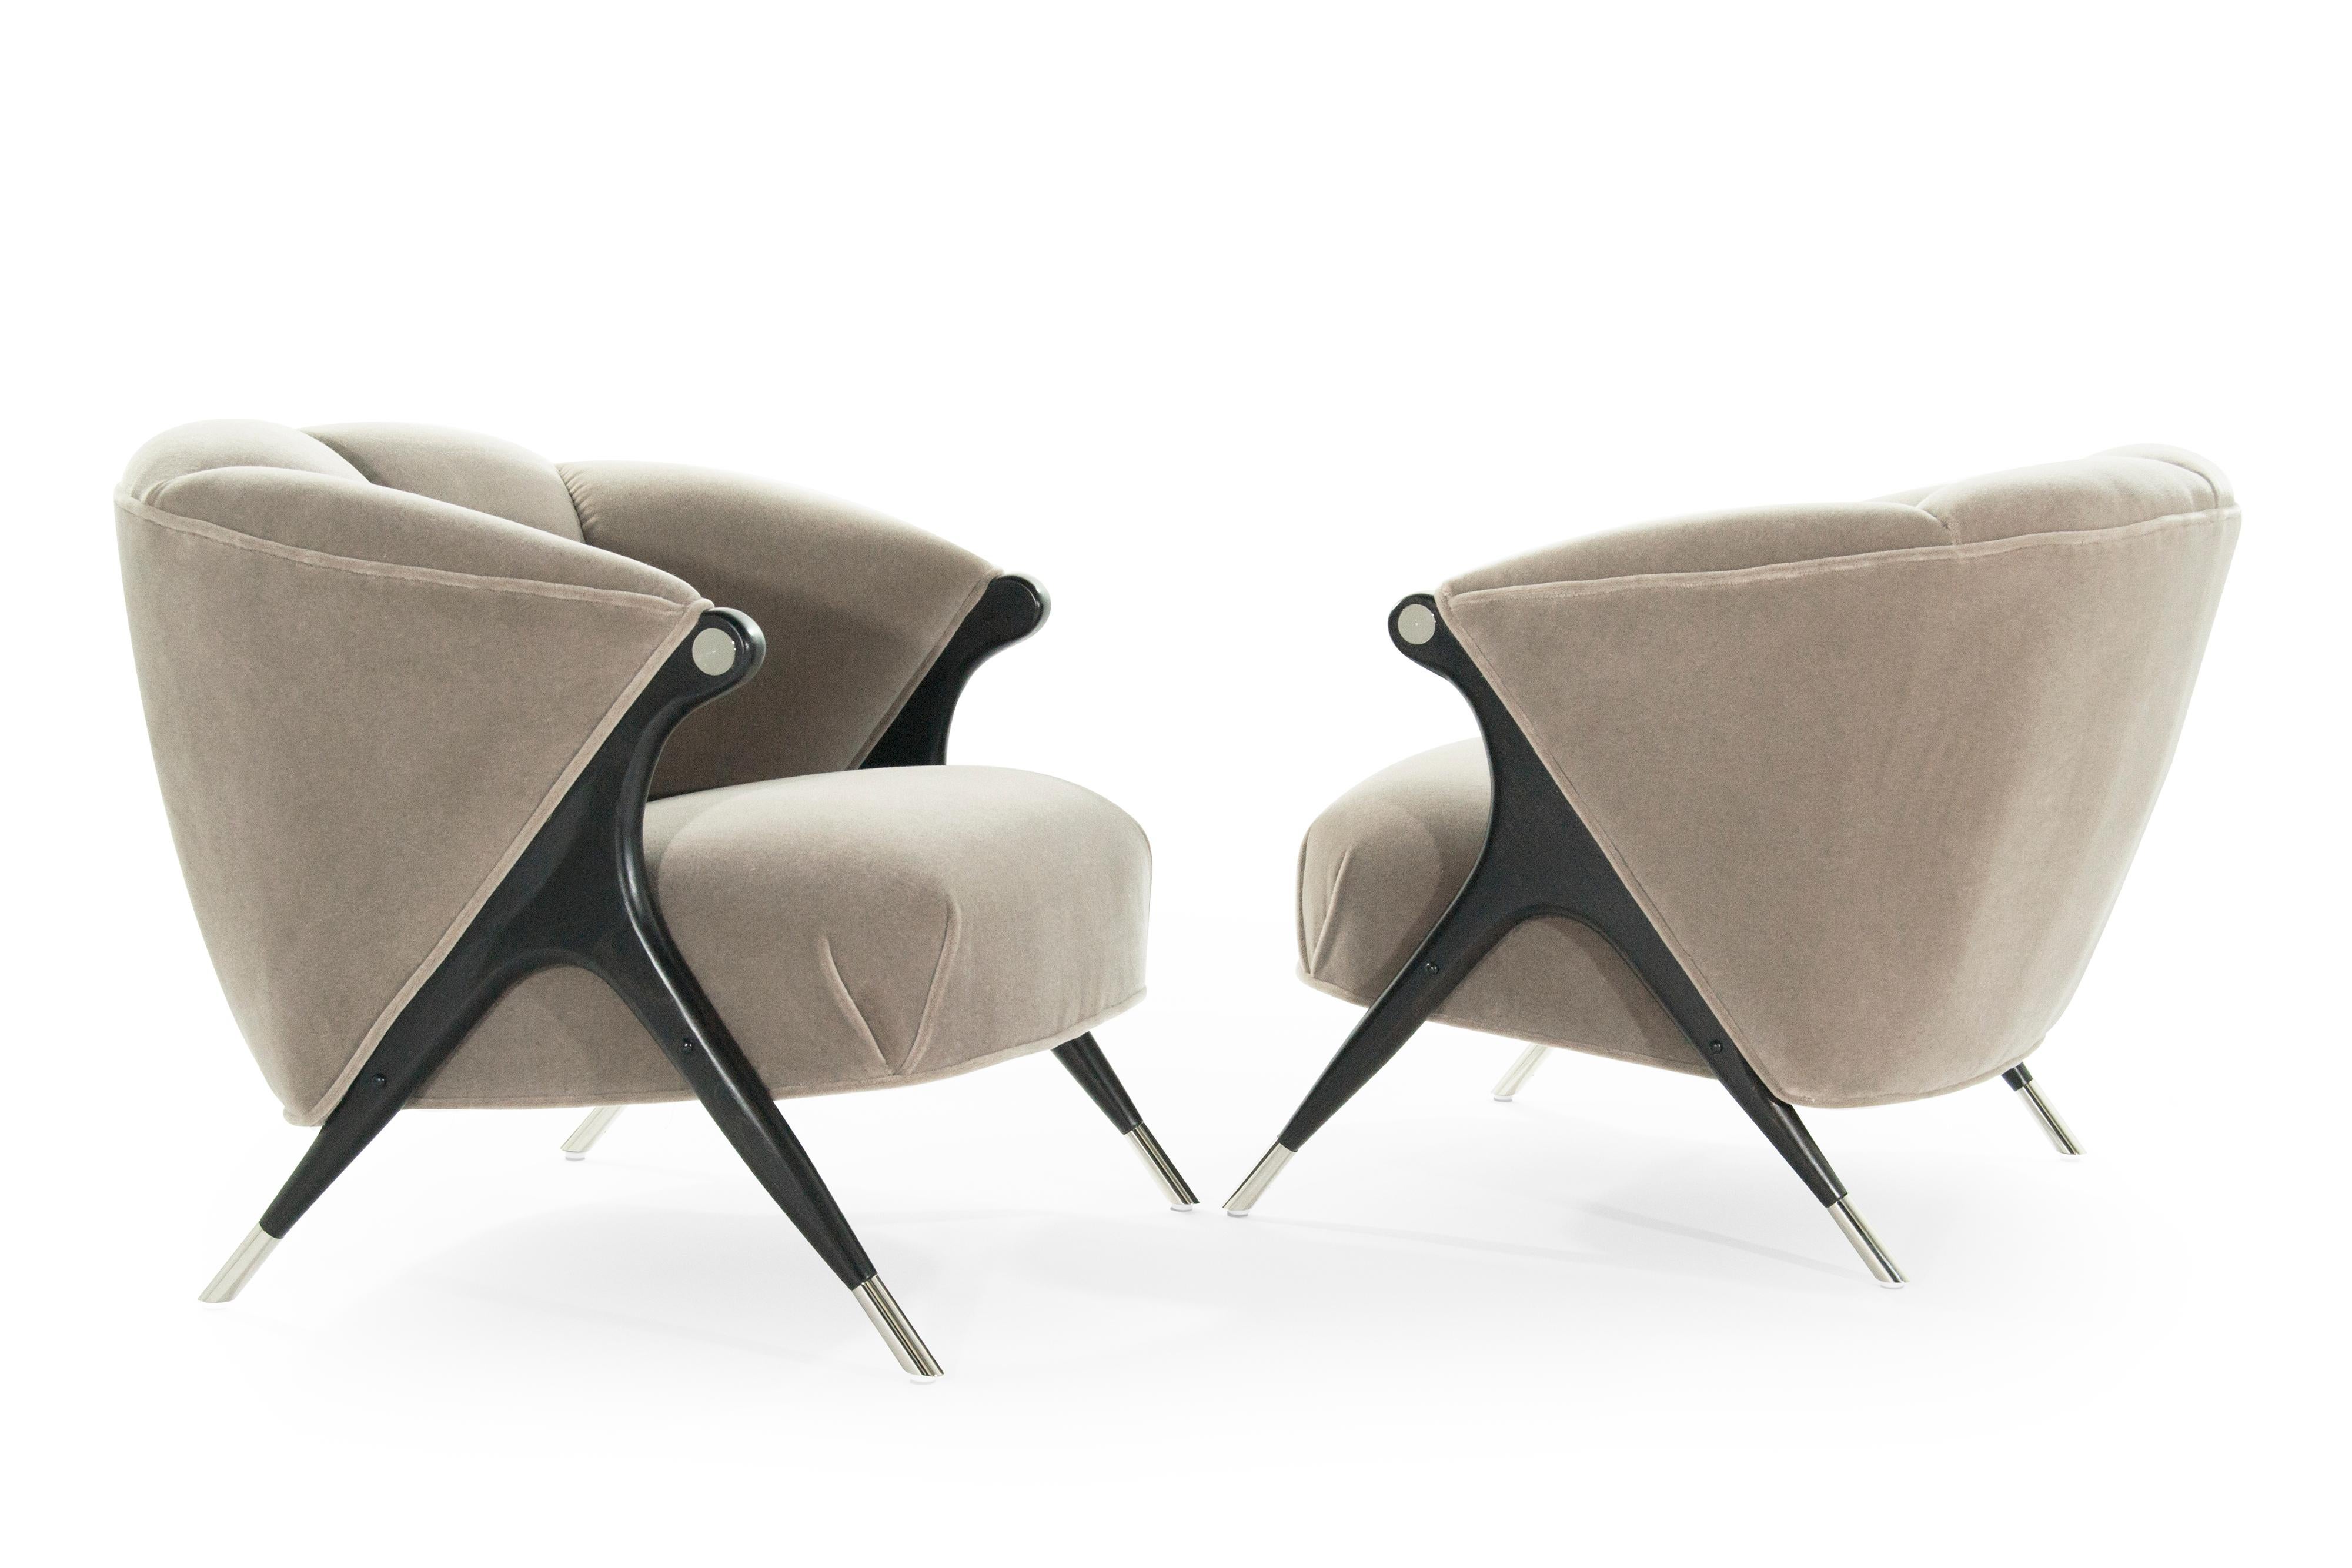 Mid-Century Modern Modernist Karpen Lounge Chairs in Taupe Mohair, 1950s